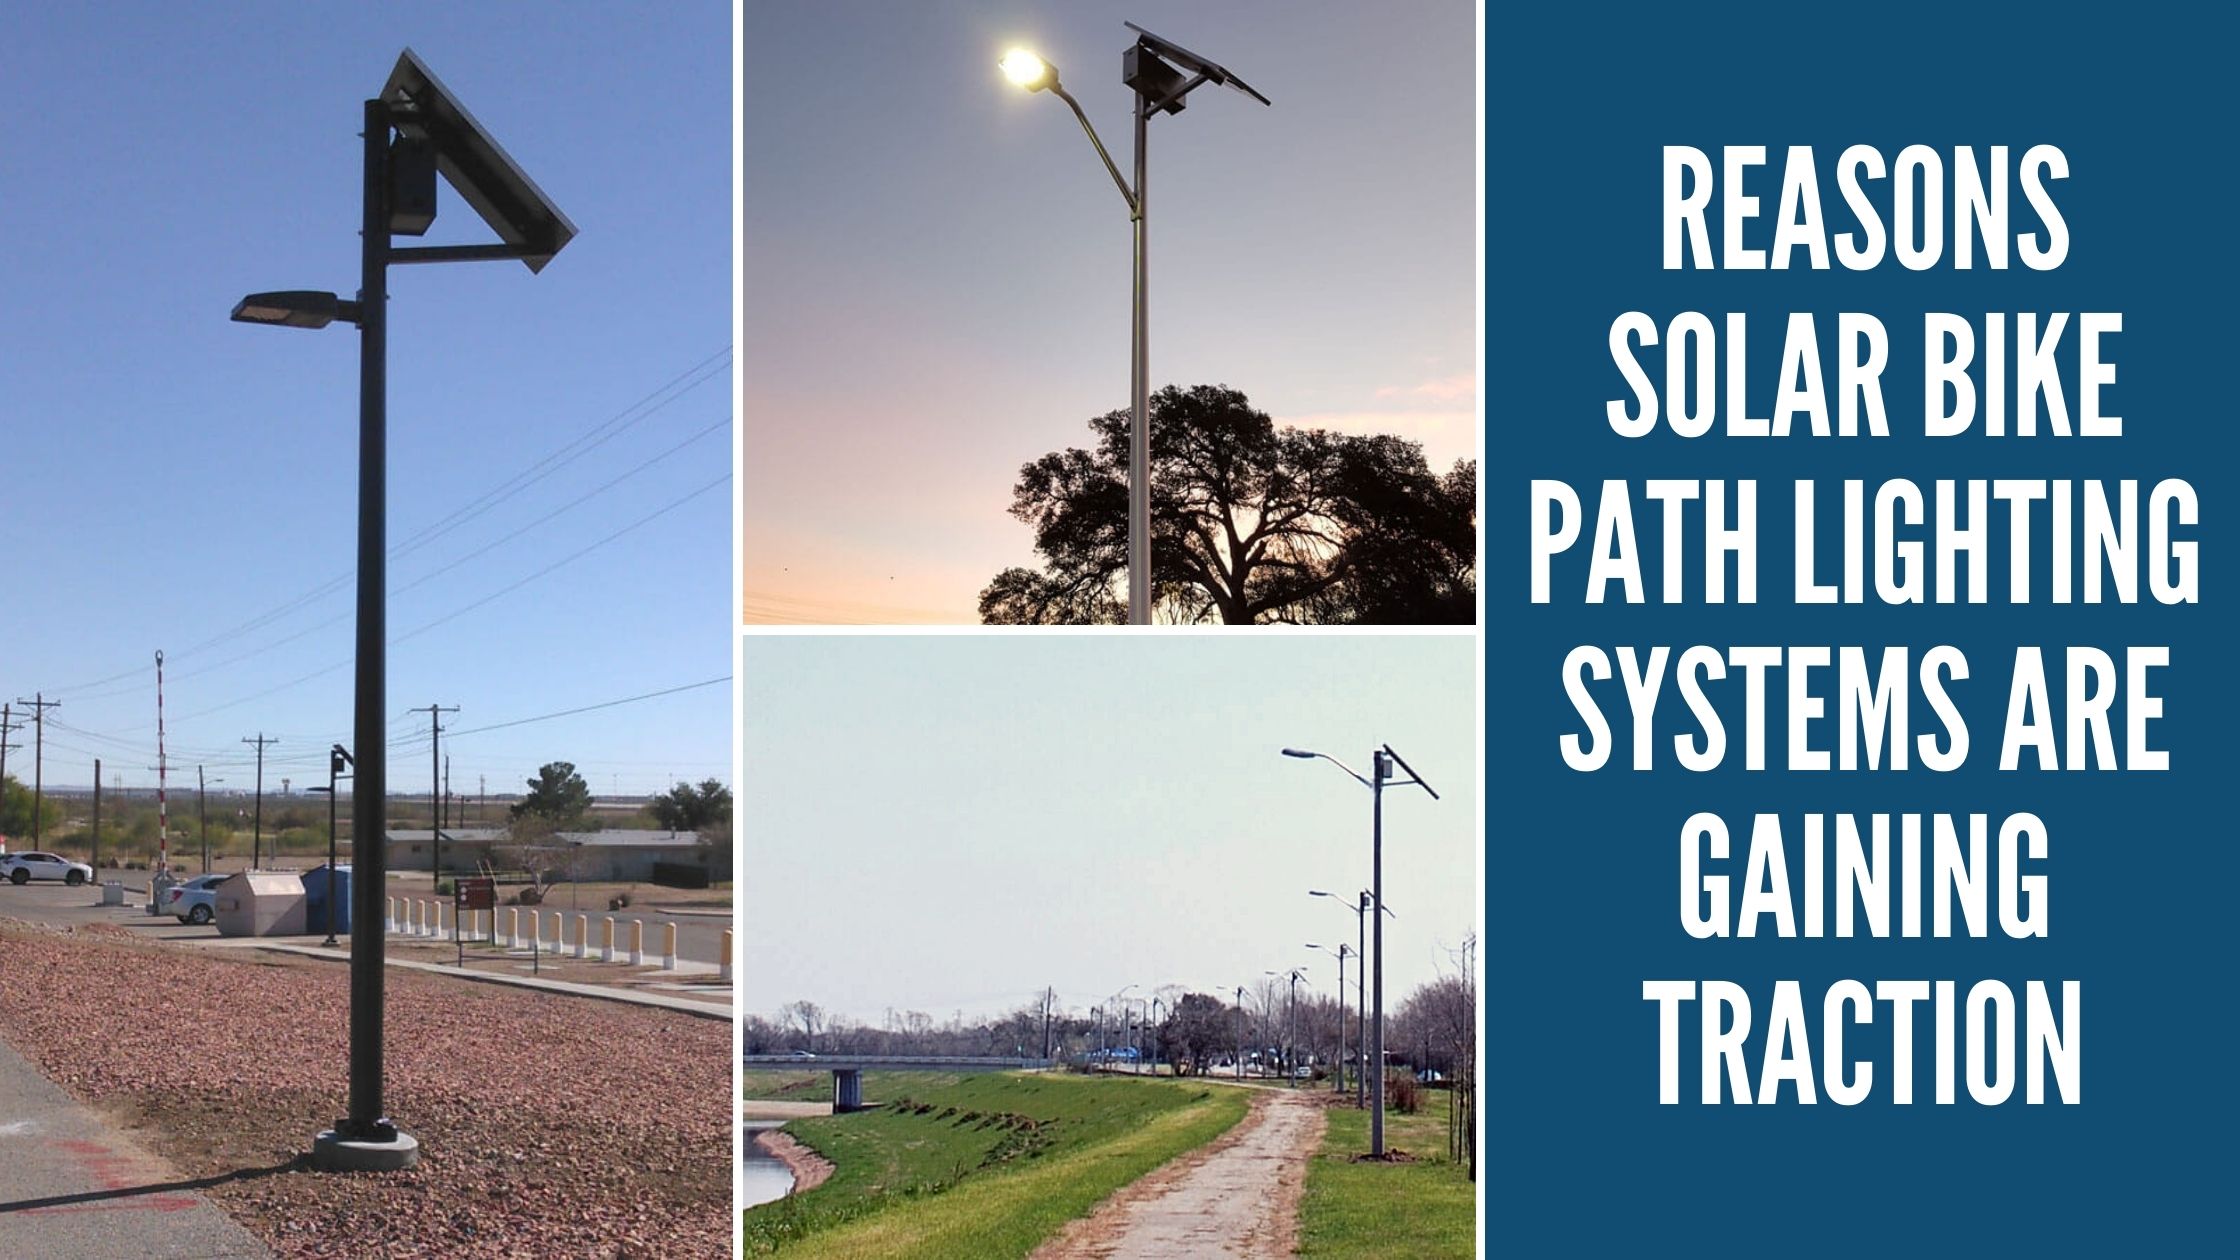 Reasons Solar Bike Path Lighting Systems Are Gaining Traction